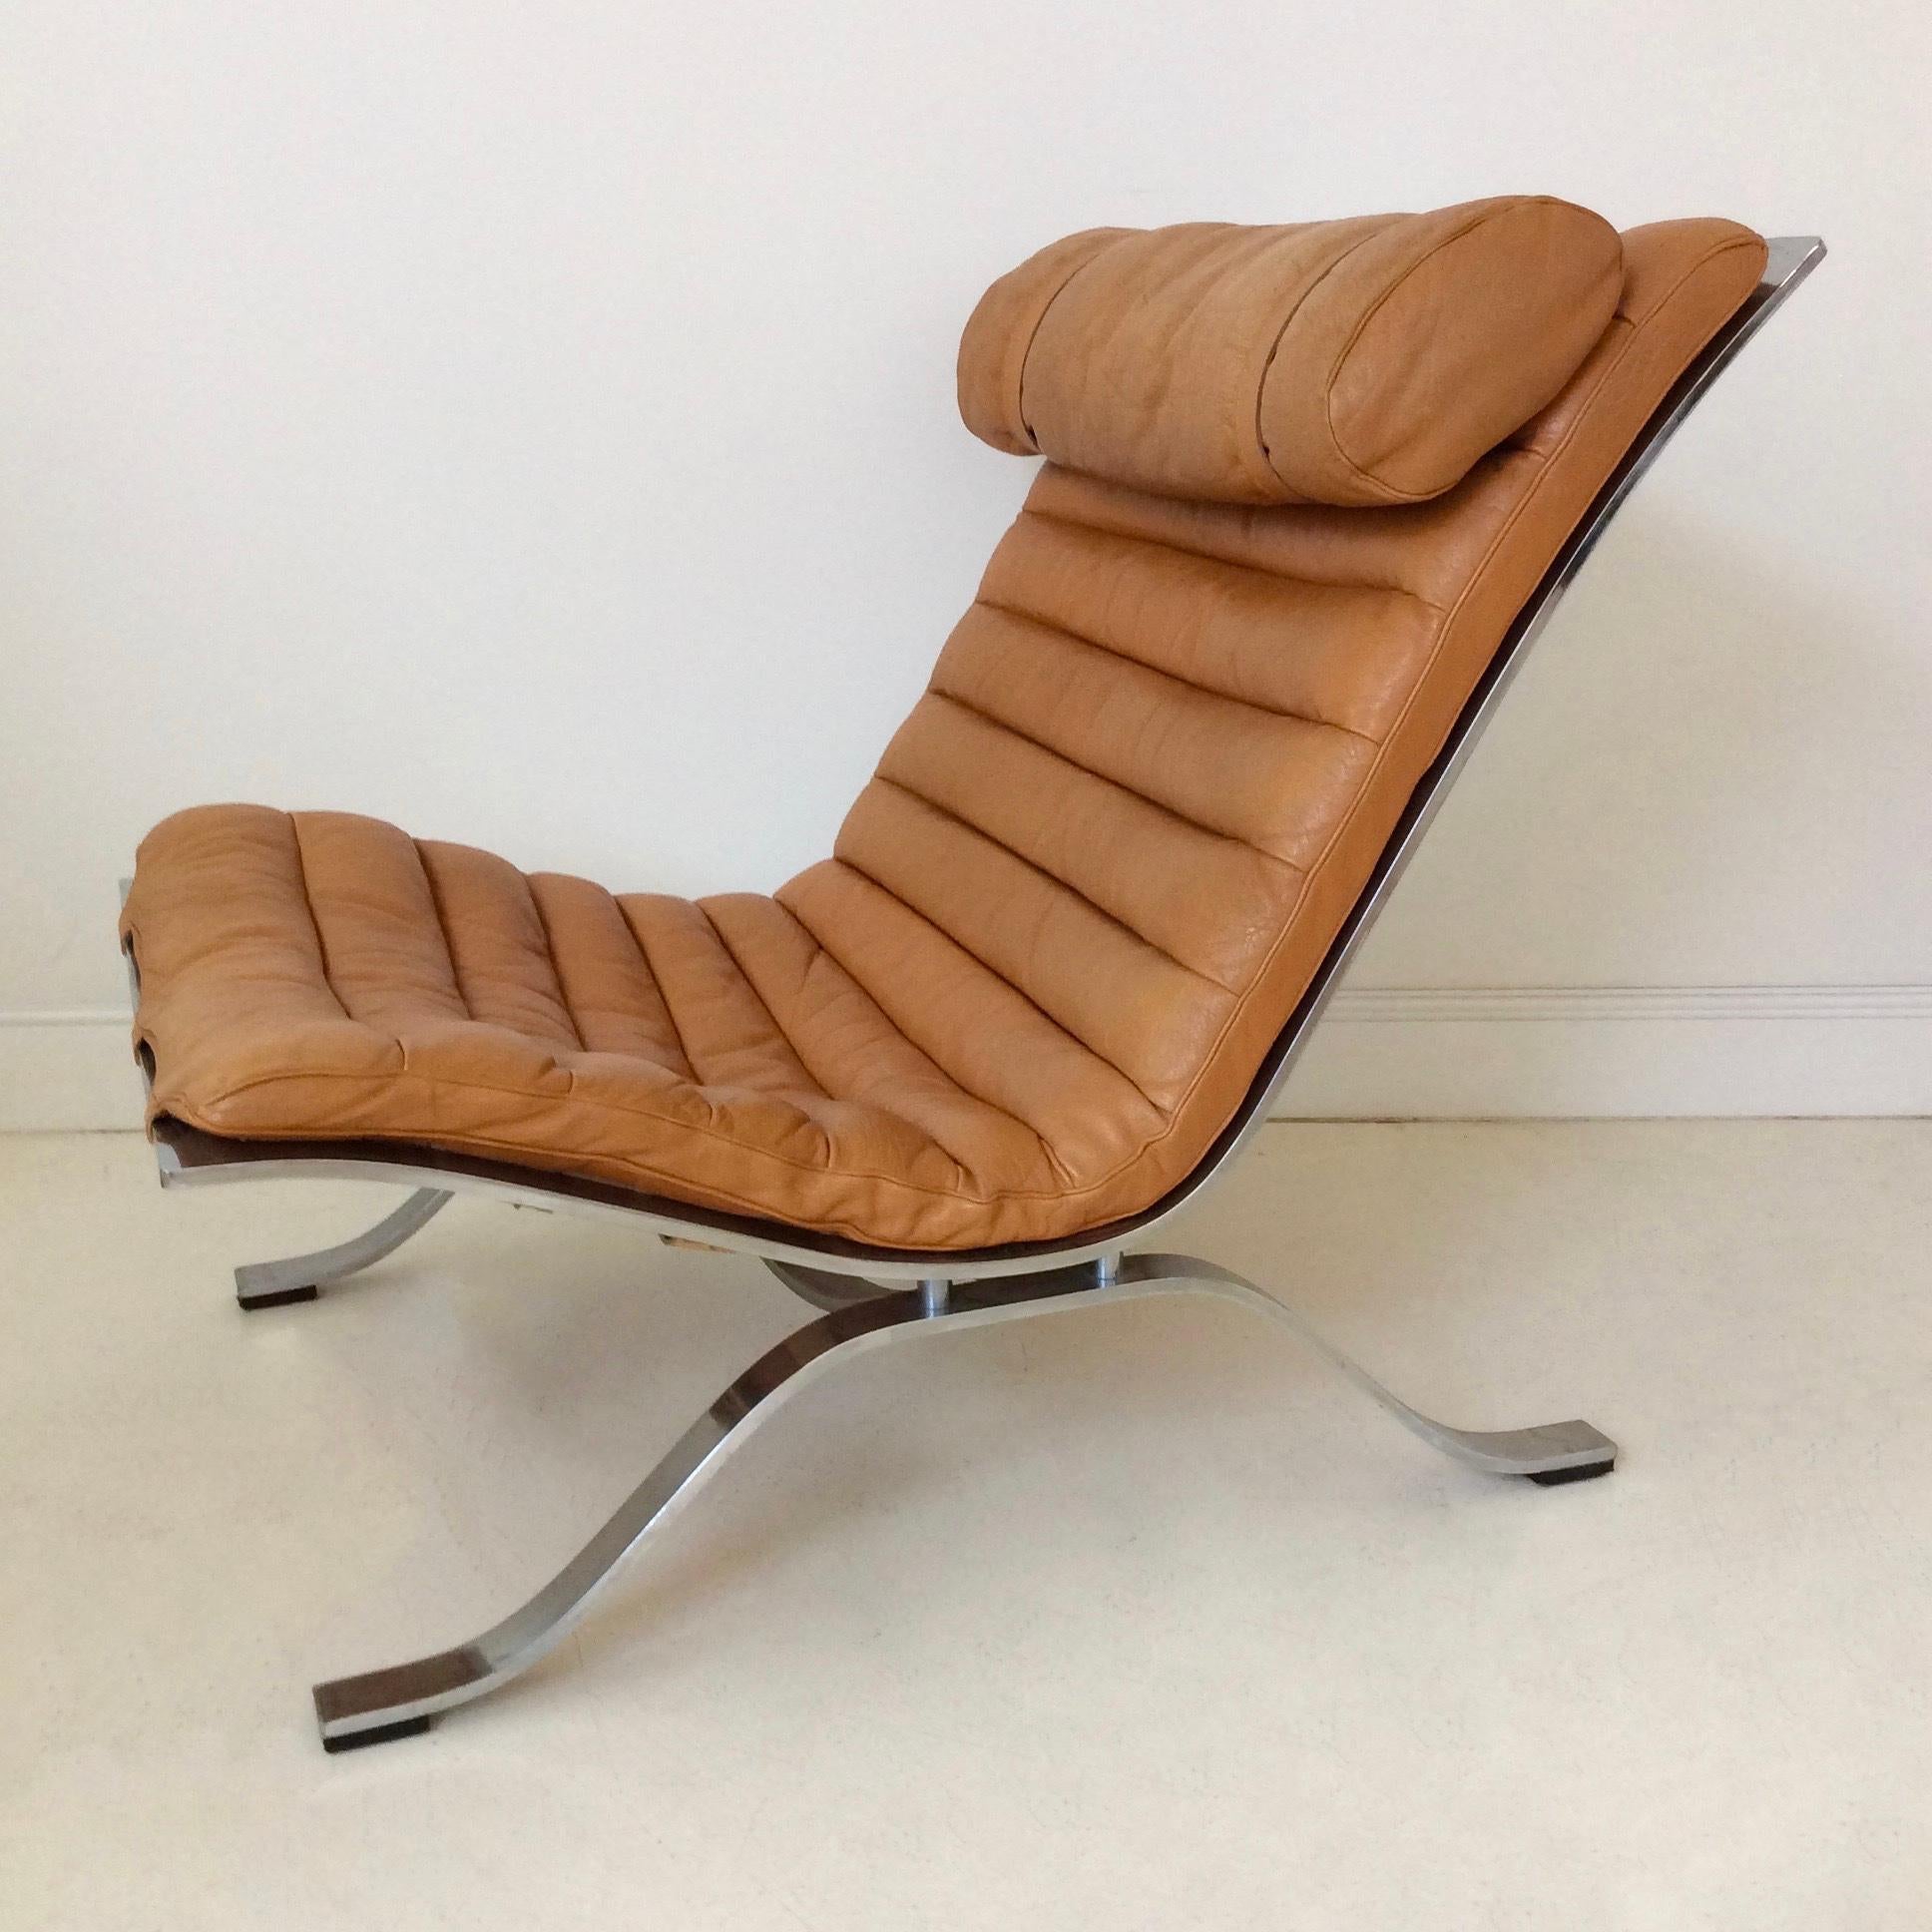 Beautiful Arne Norell Ari model lounge chair for Arne Norell Edition, circa 1965, Sweden.
Nice original cognac leather and polished steel frame.
Label underneath.
Dimensions: 75 cm H, 65 cm W, 95 cm D, seat height: 33 cm.
Good original